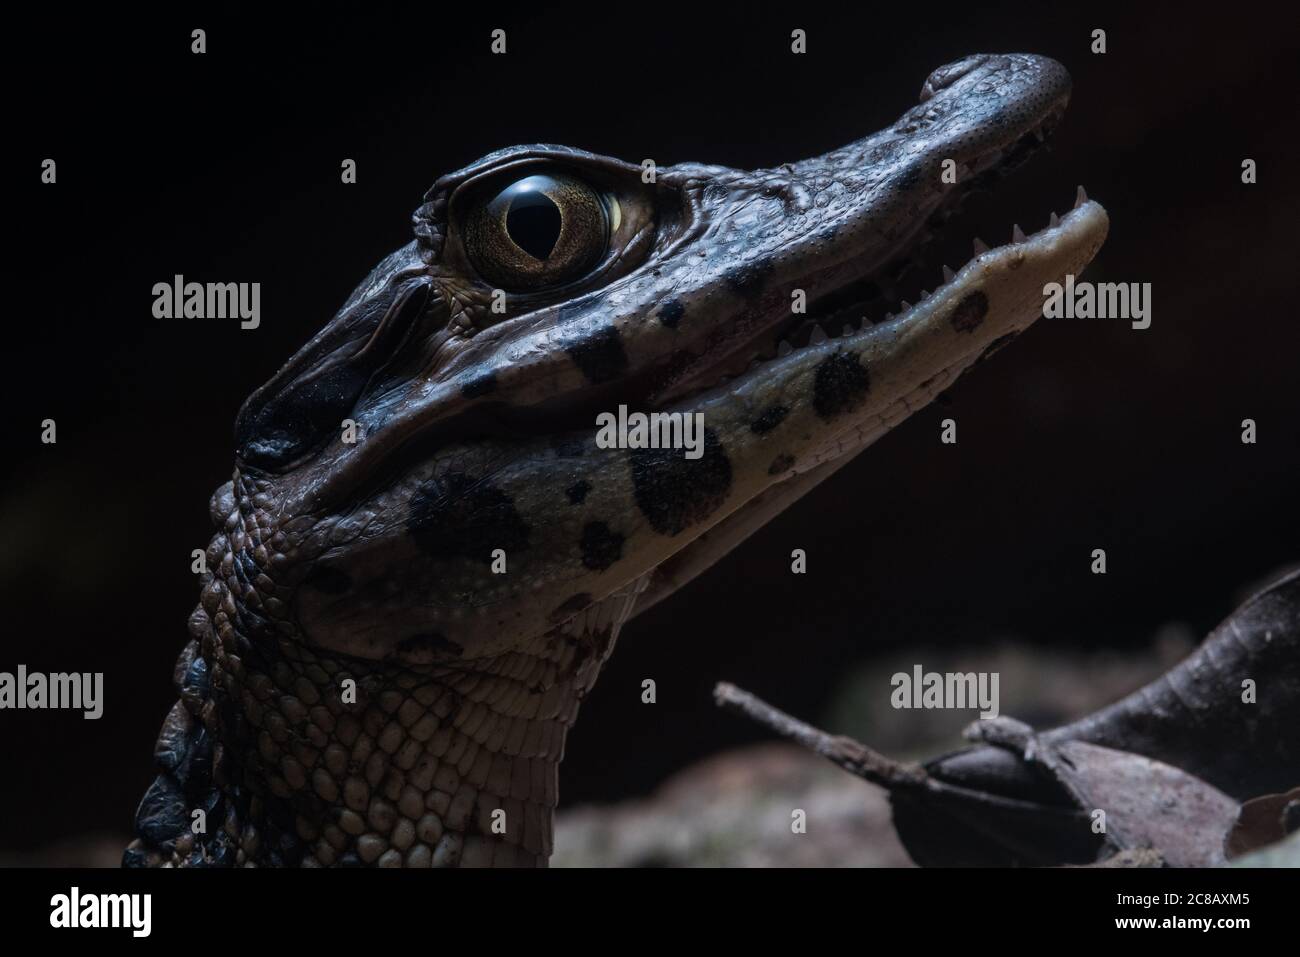 Black Caiman High Resolution Stock Photography and Images - Alamy